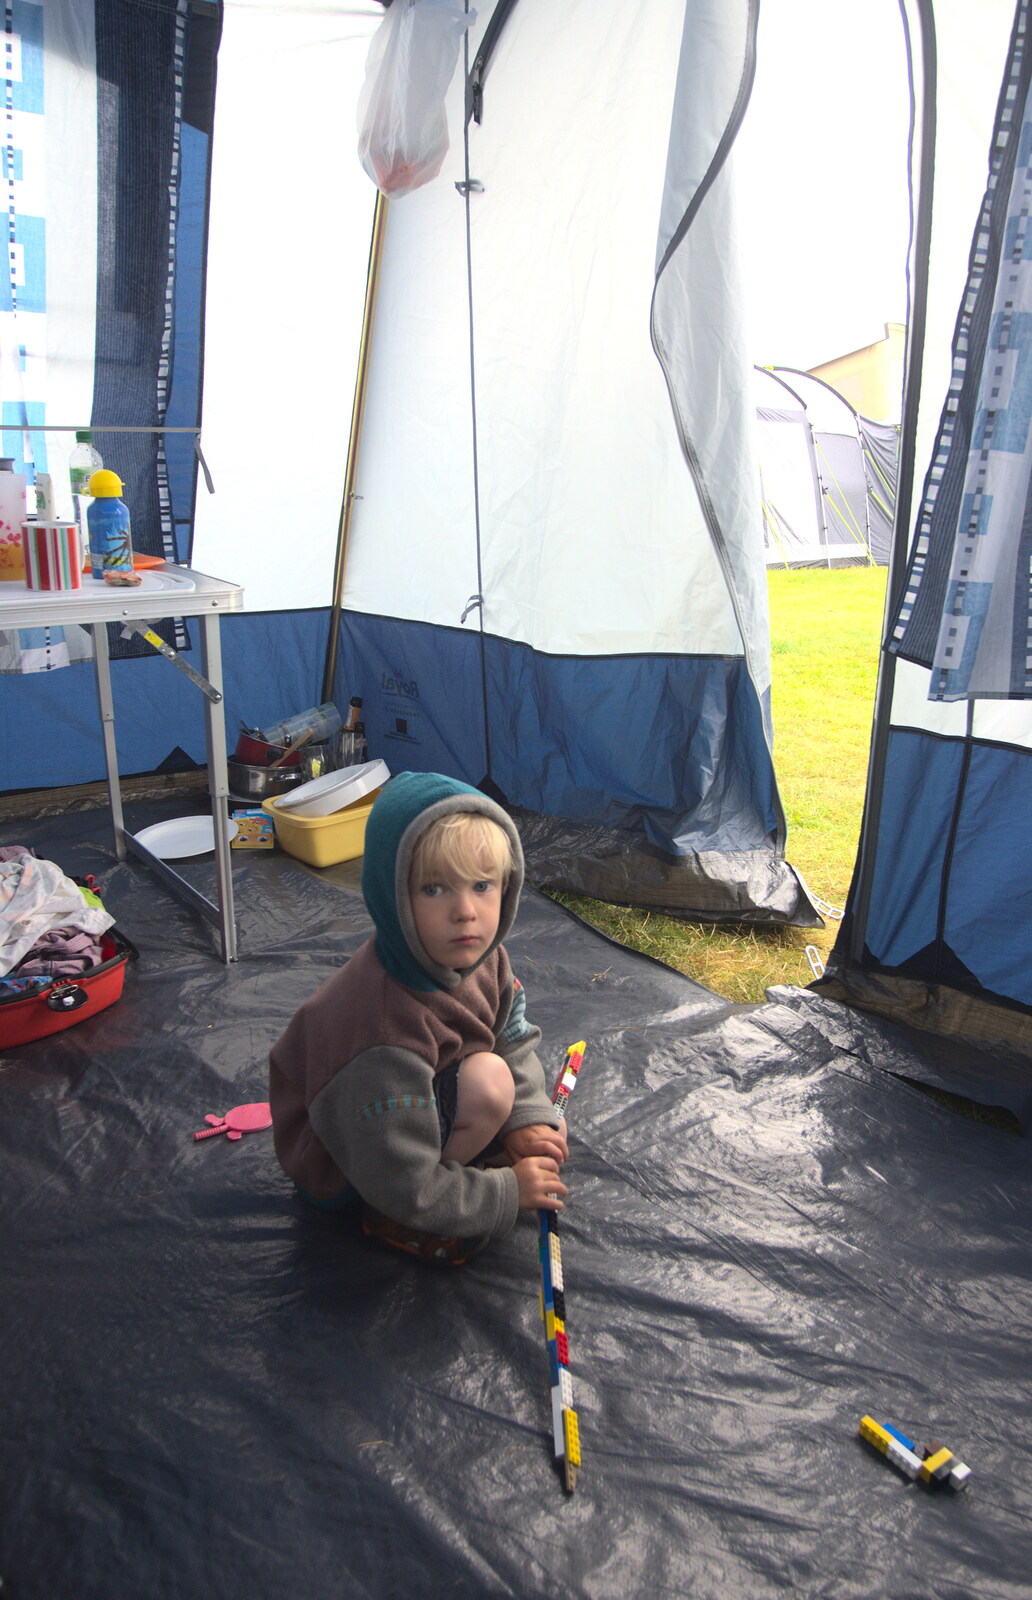 Harry plays with Lego from A Wet Weekend of Camping, Waxham Sands, Norfolk - 13th June 2015